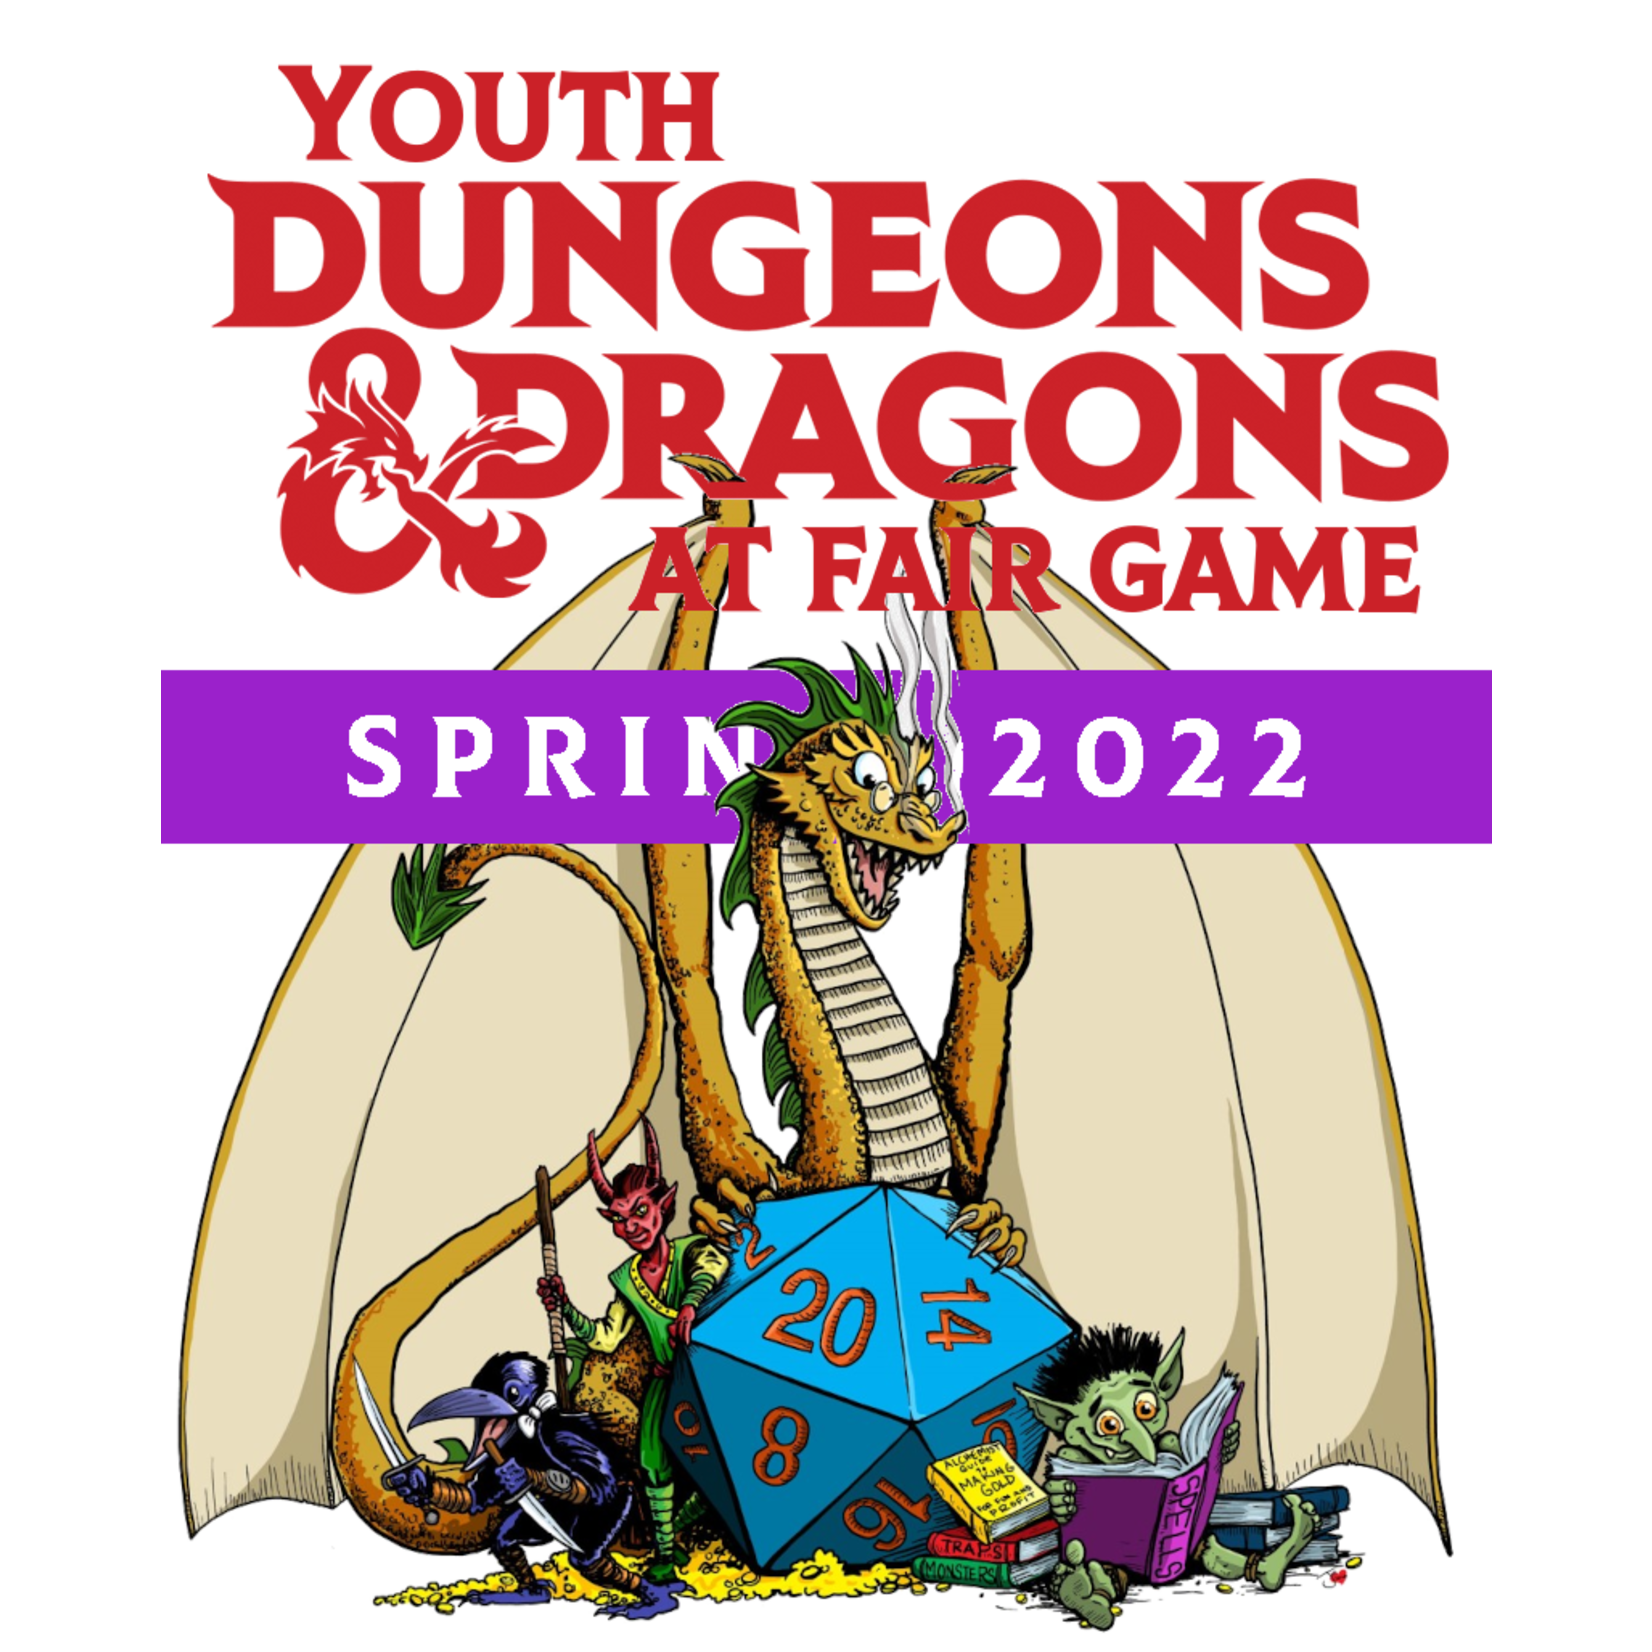 Fair Game YDND Spring 2022 - Group DB1 - Thursday 4:30-6:30 PM (Downers) (Ages 8-13)